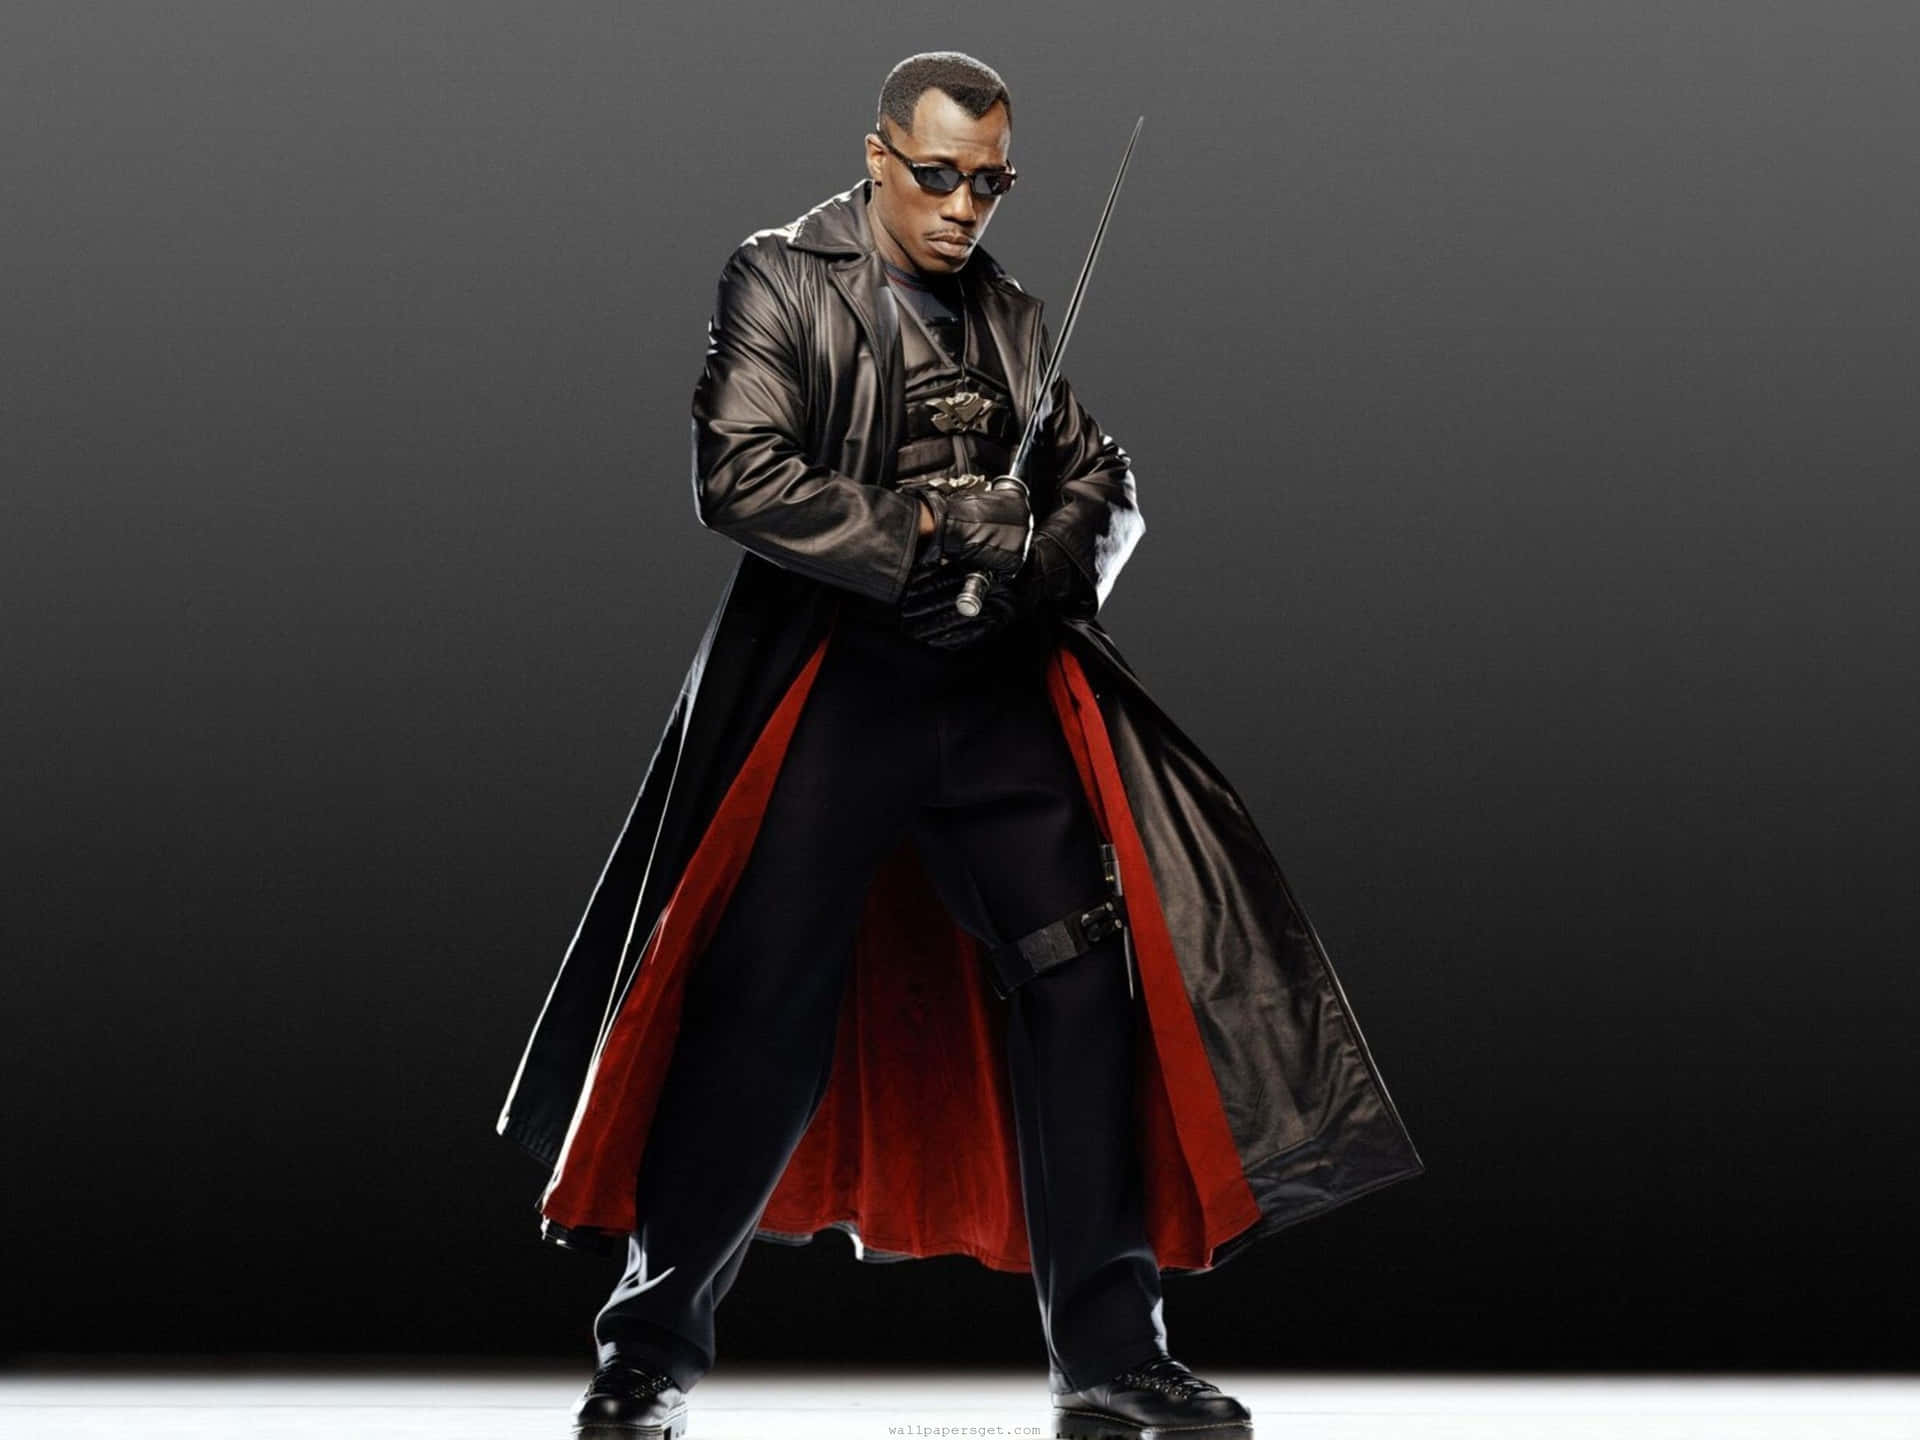 Wesley Snipes in iconic action pose Wallpaper